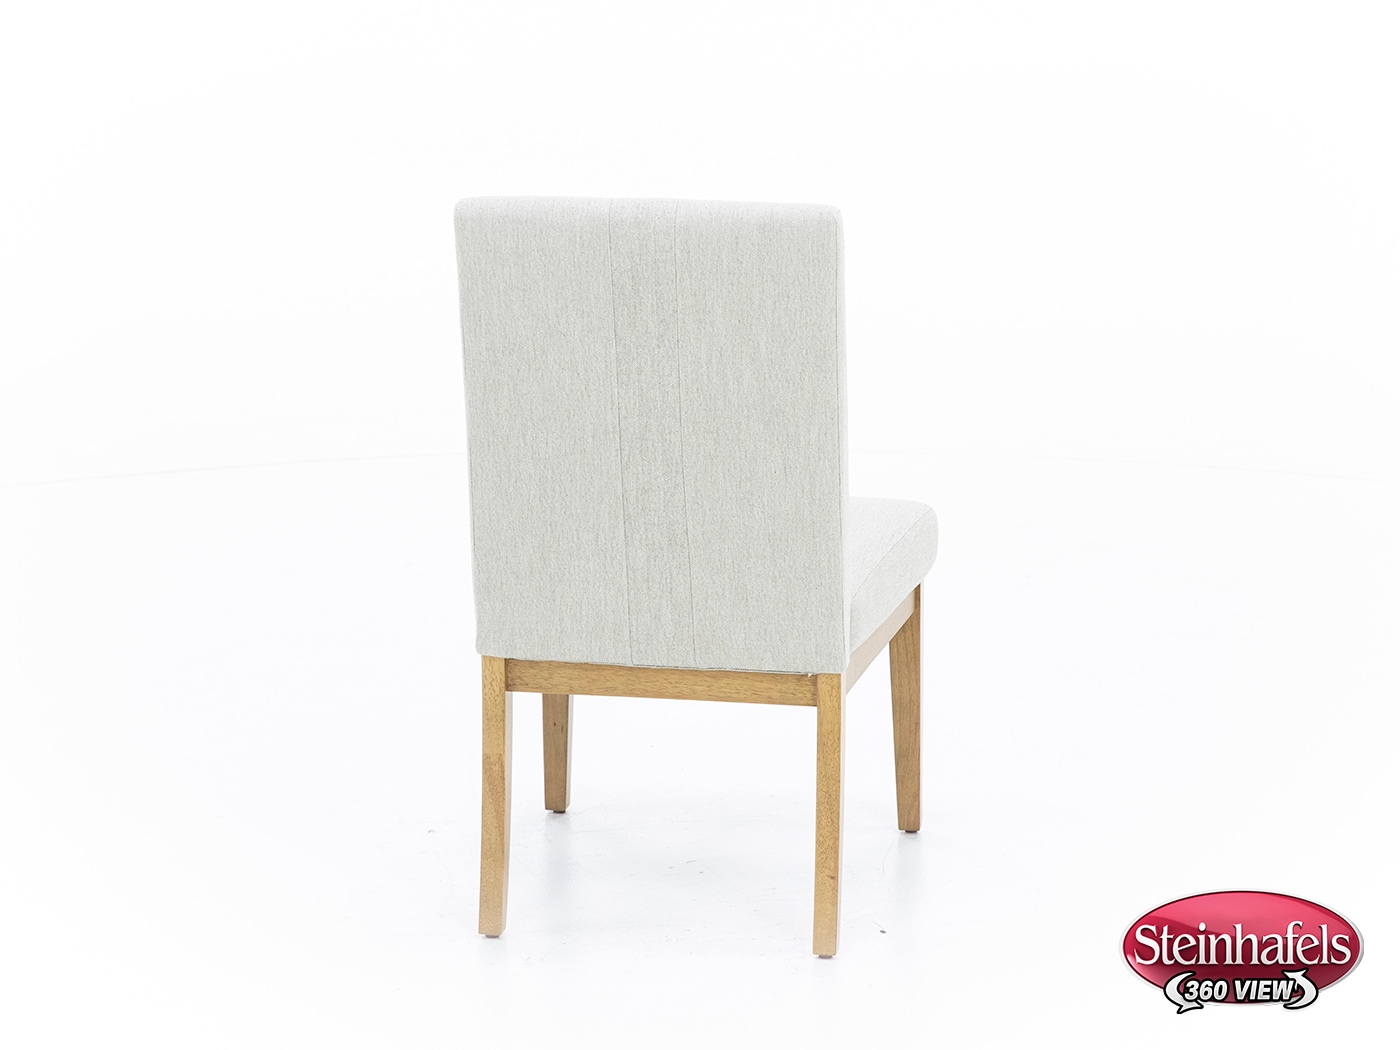 rivr wood grain inch standard seat height side chair  image   